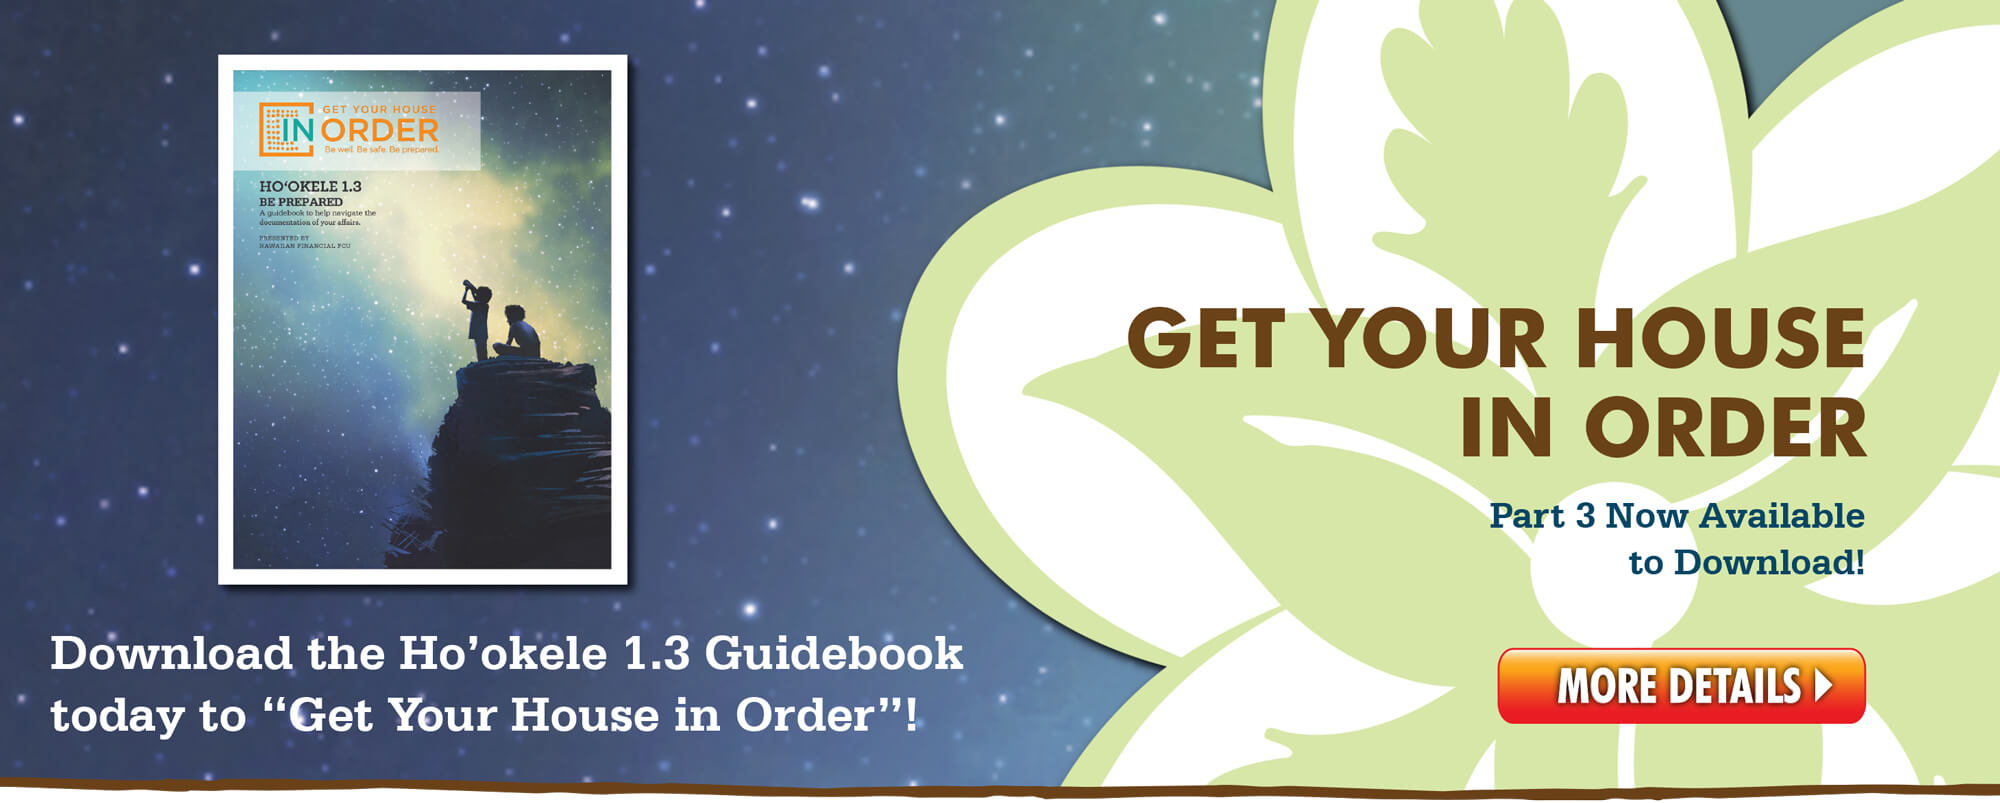 Download the Ho'okele 1.3 Guidebook today to 